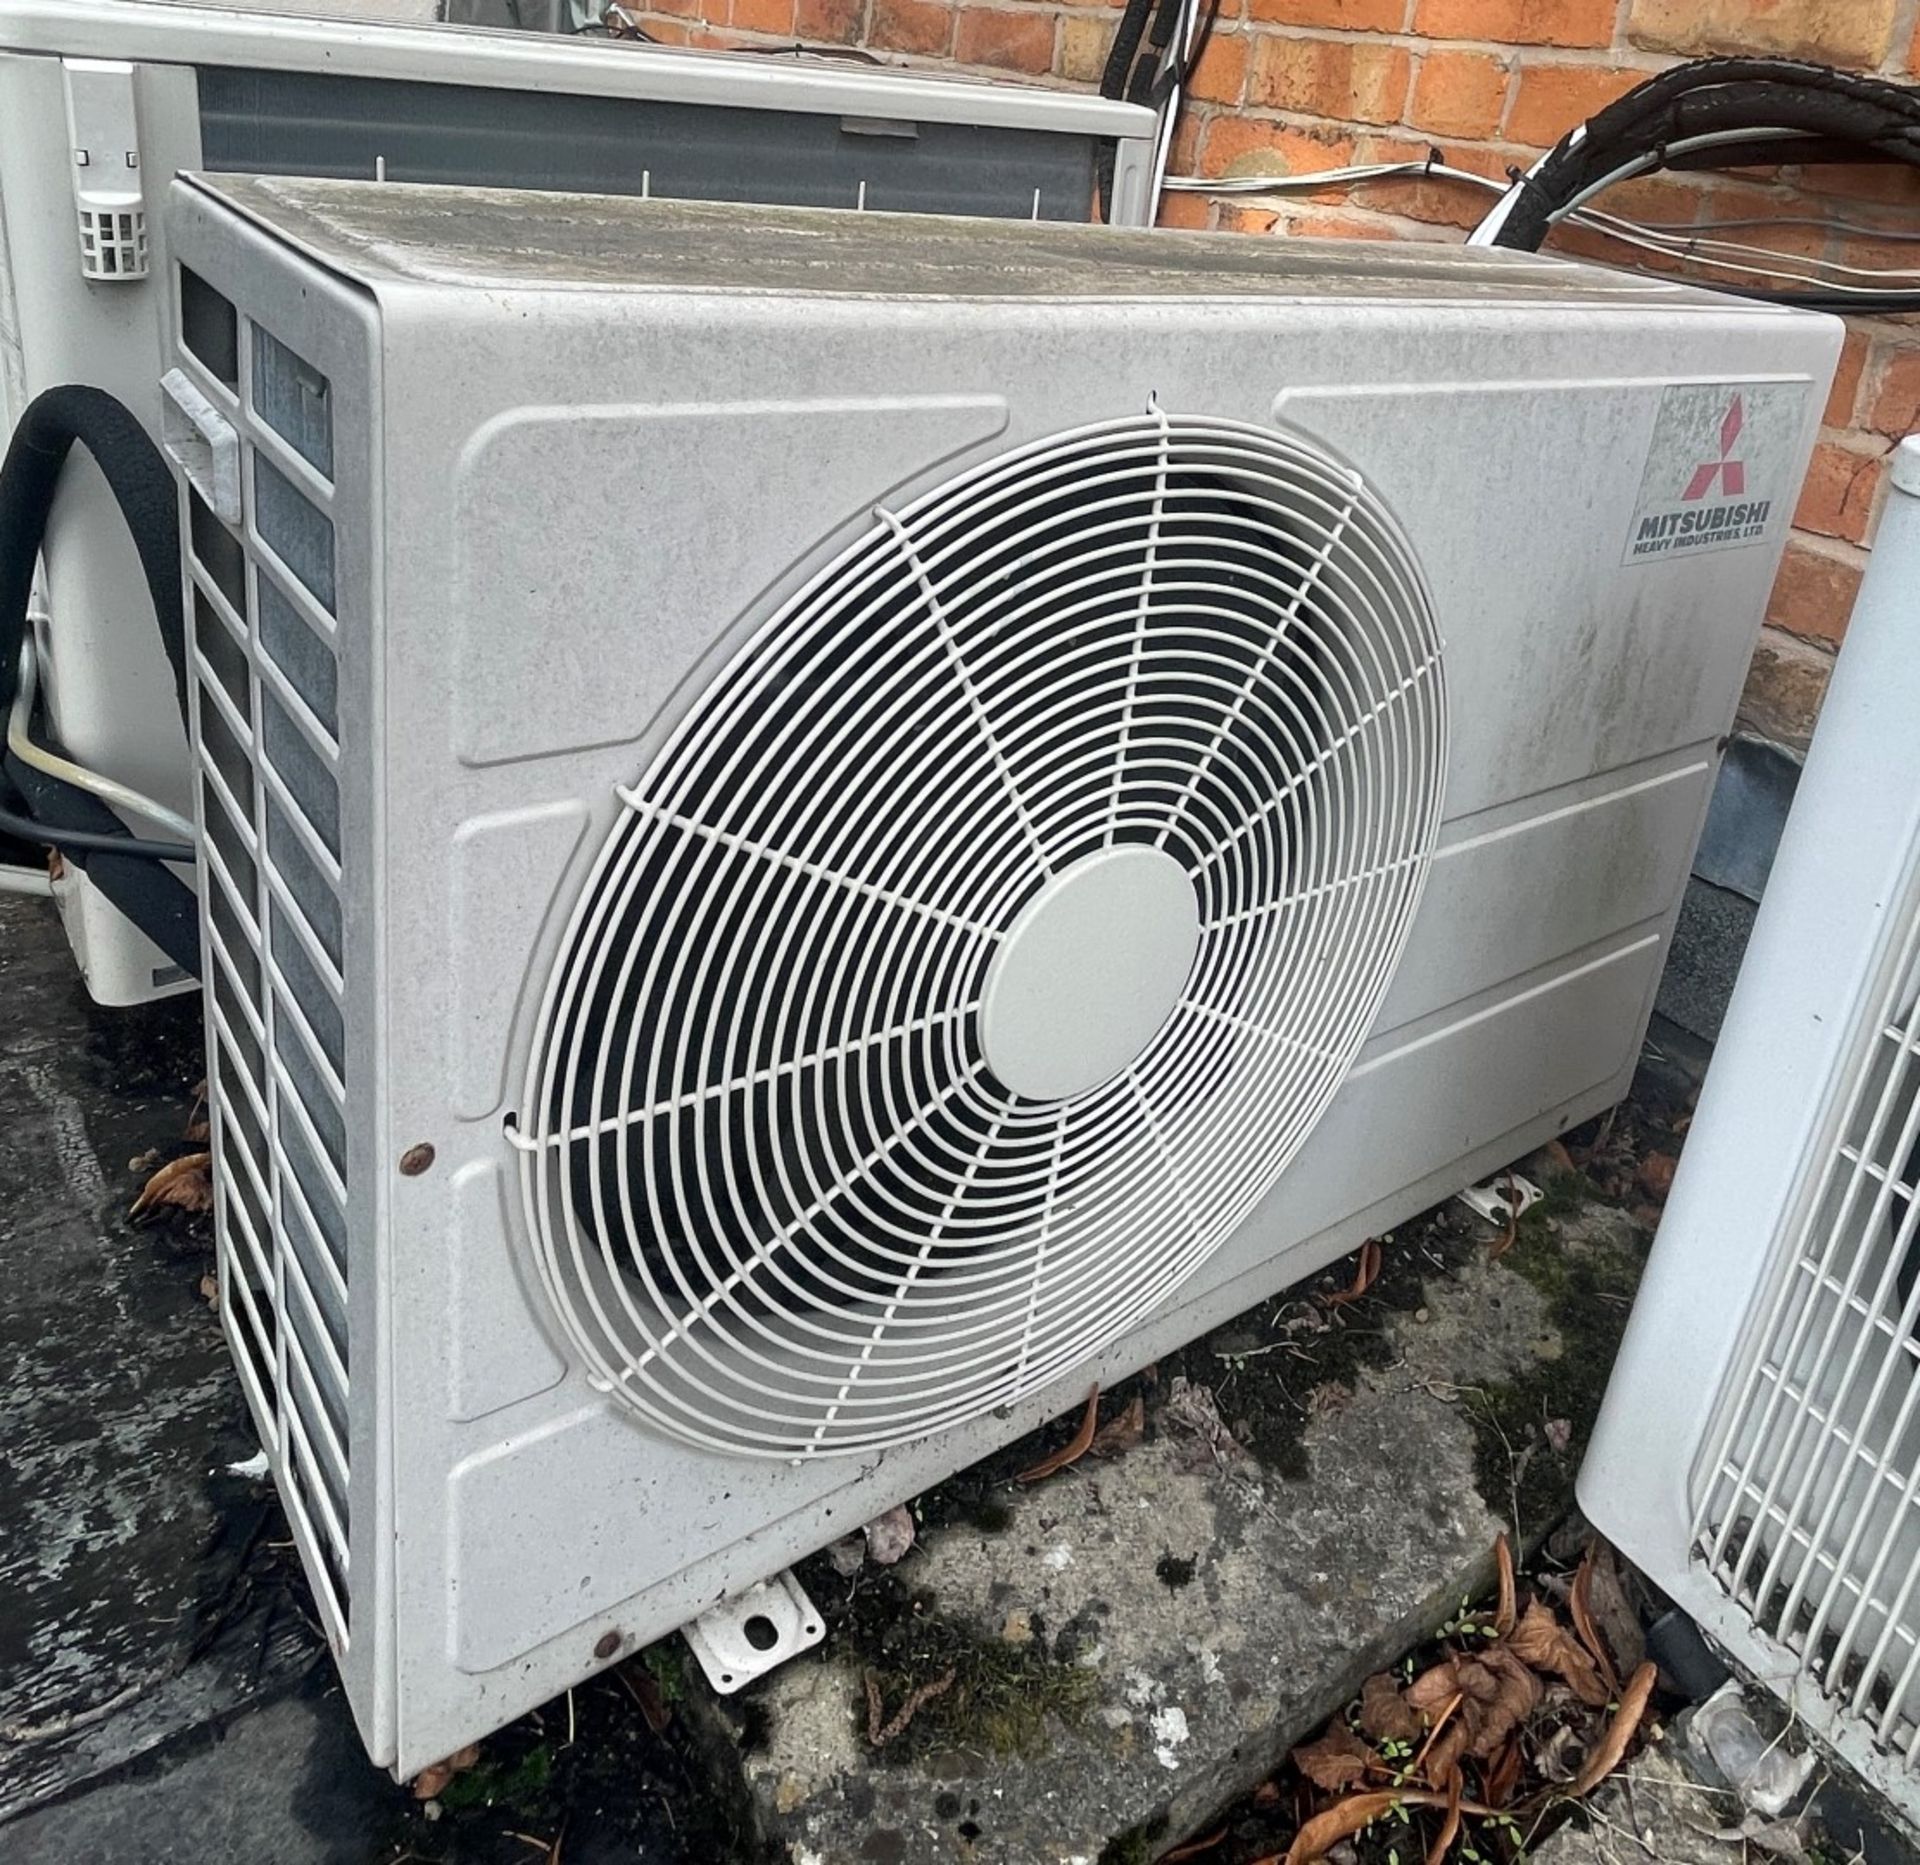 1 x Mitsubishi Split Type Air Conditioning Unit With Blu Science Virus Protection - 2018 Model - Image 2 of 8